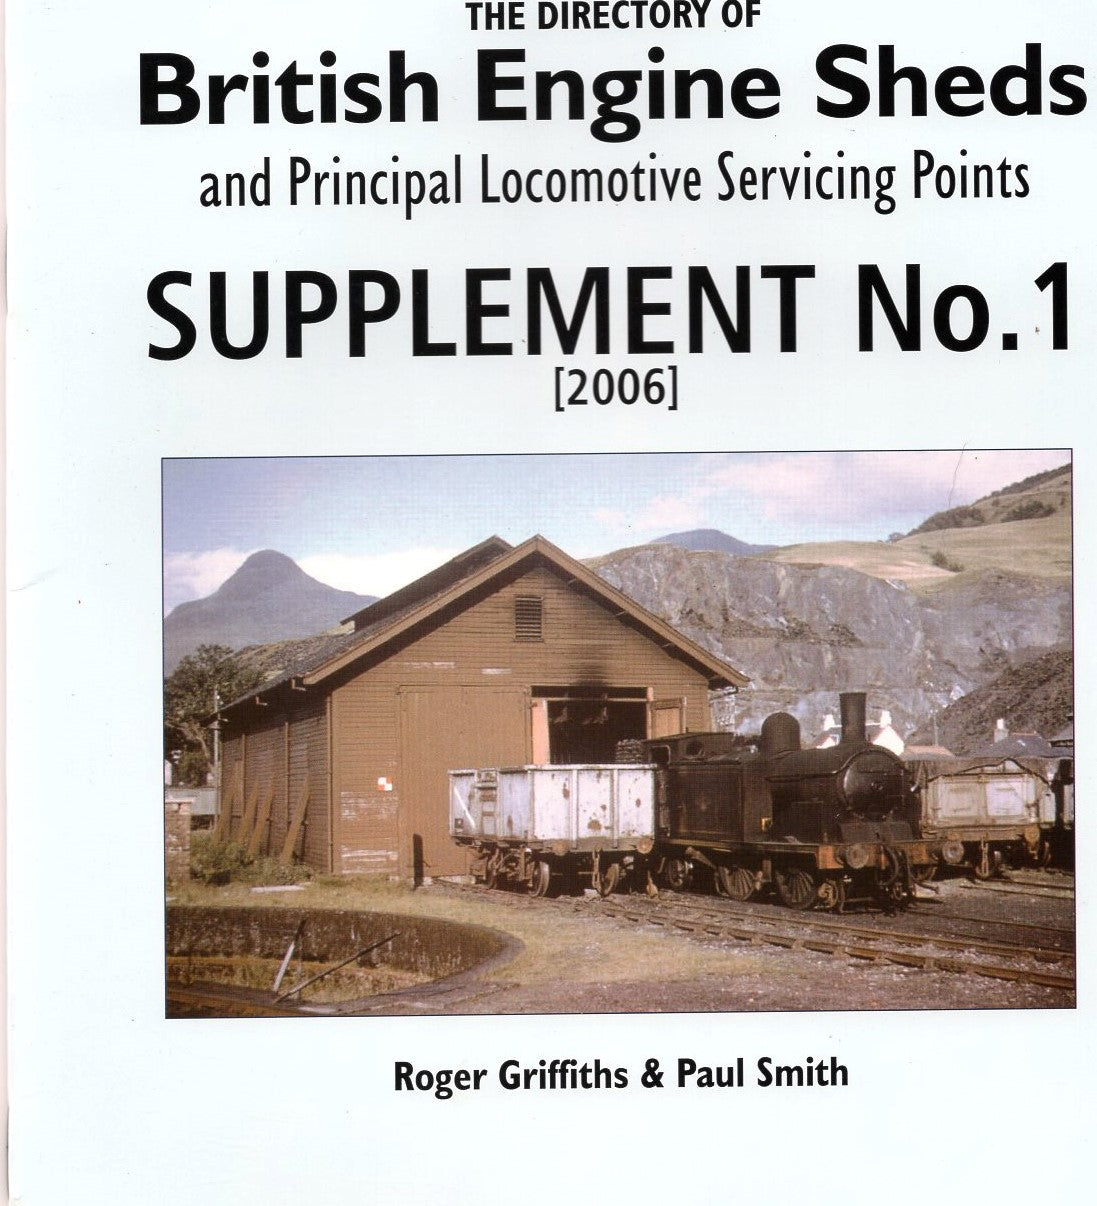 The Directory of Engine Shed - Supplement No. 1 (2006)